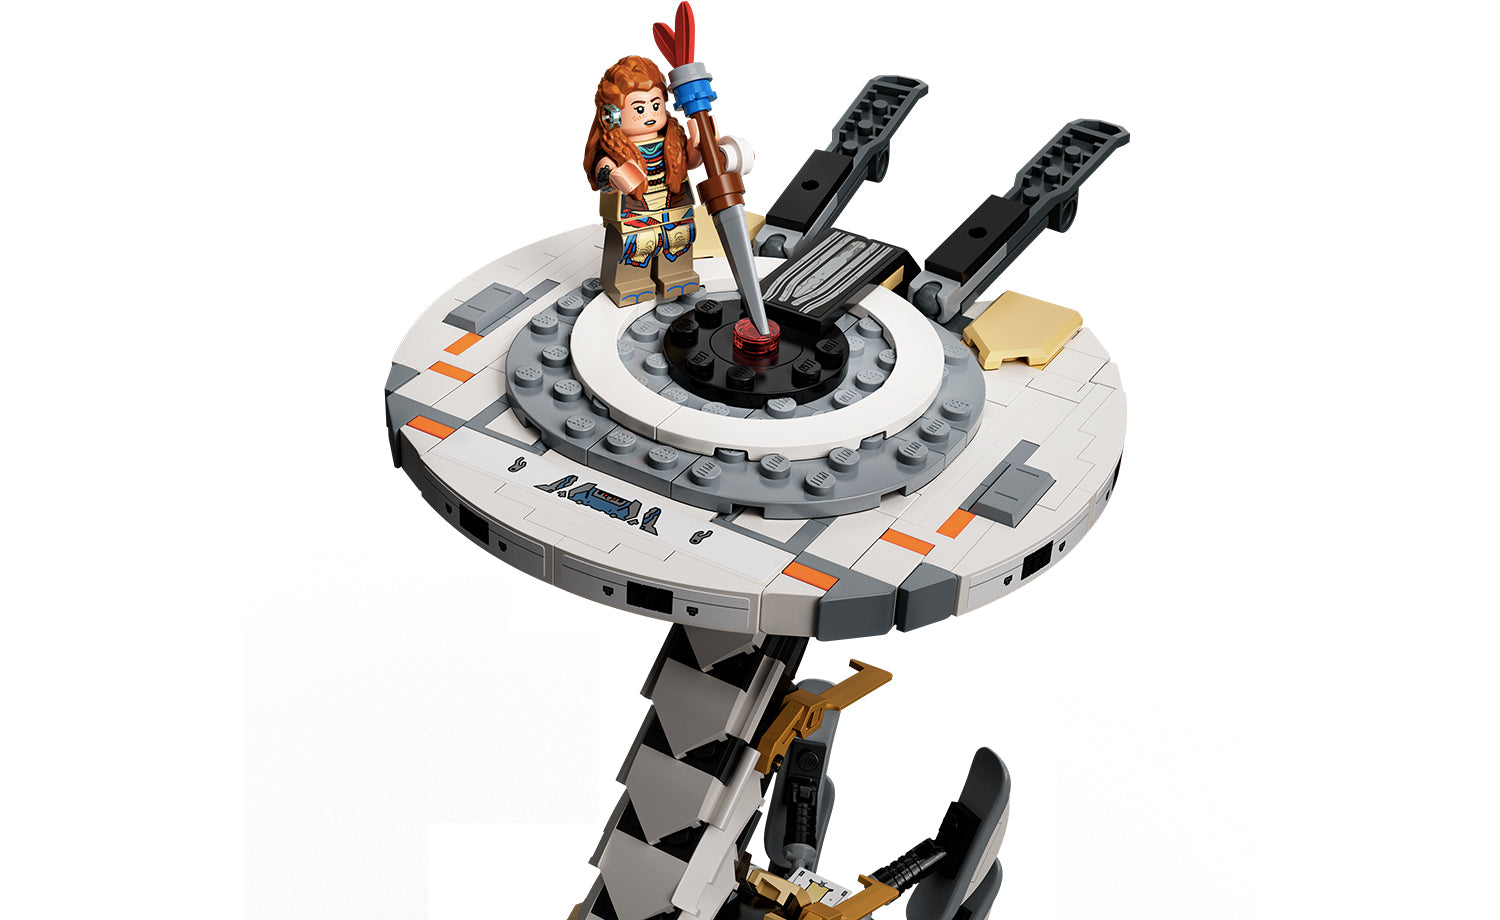  LEGO Horizon Forbidden West: Tallneck 76989 Building Set - Aloy  Minifigure & Watcher Figure, Featuring Minifigure Accessories from The  Game, Collectible Gift Idea for Teens, Adults, Men, Women : Toys & Games